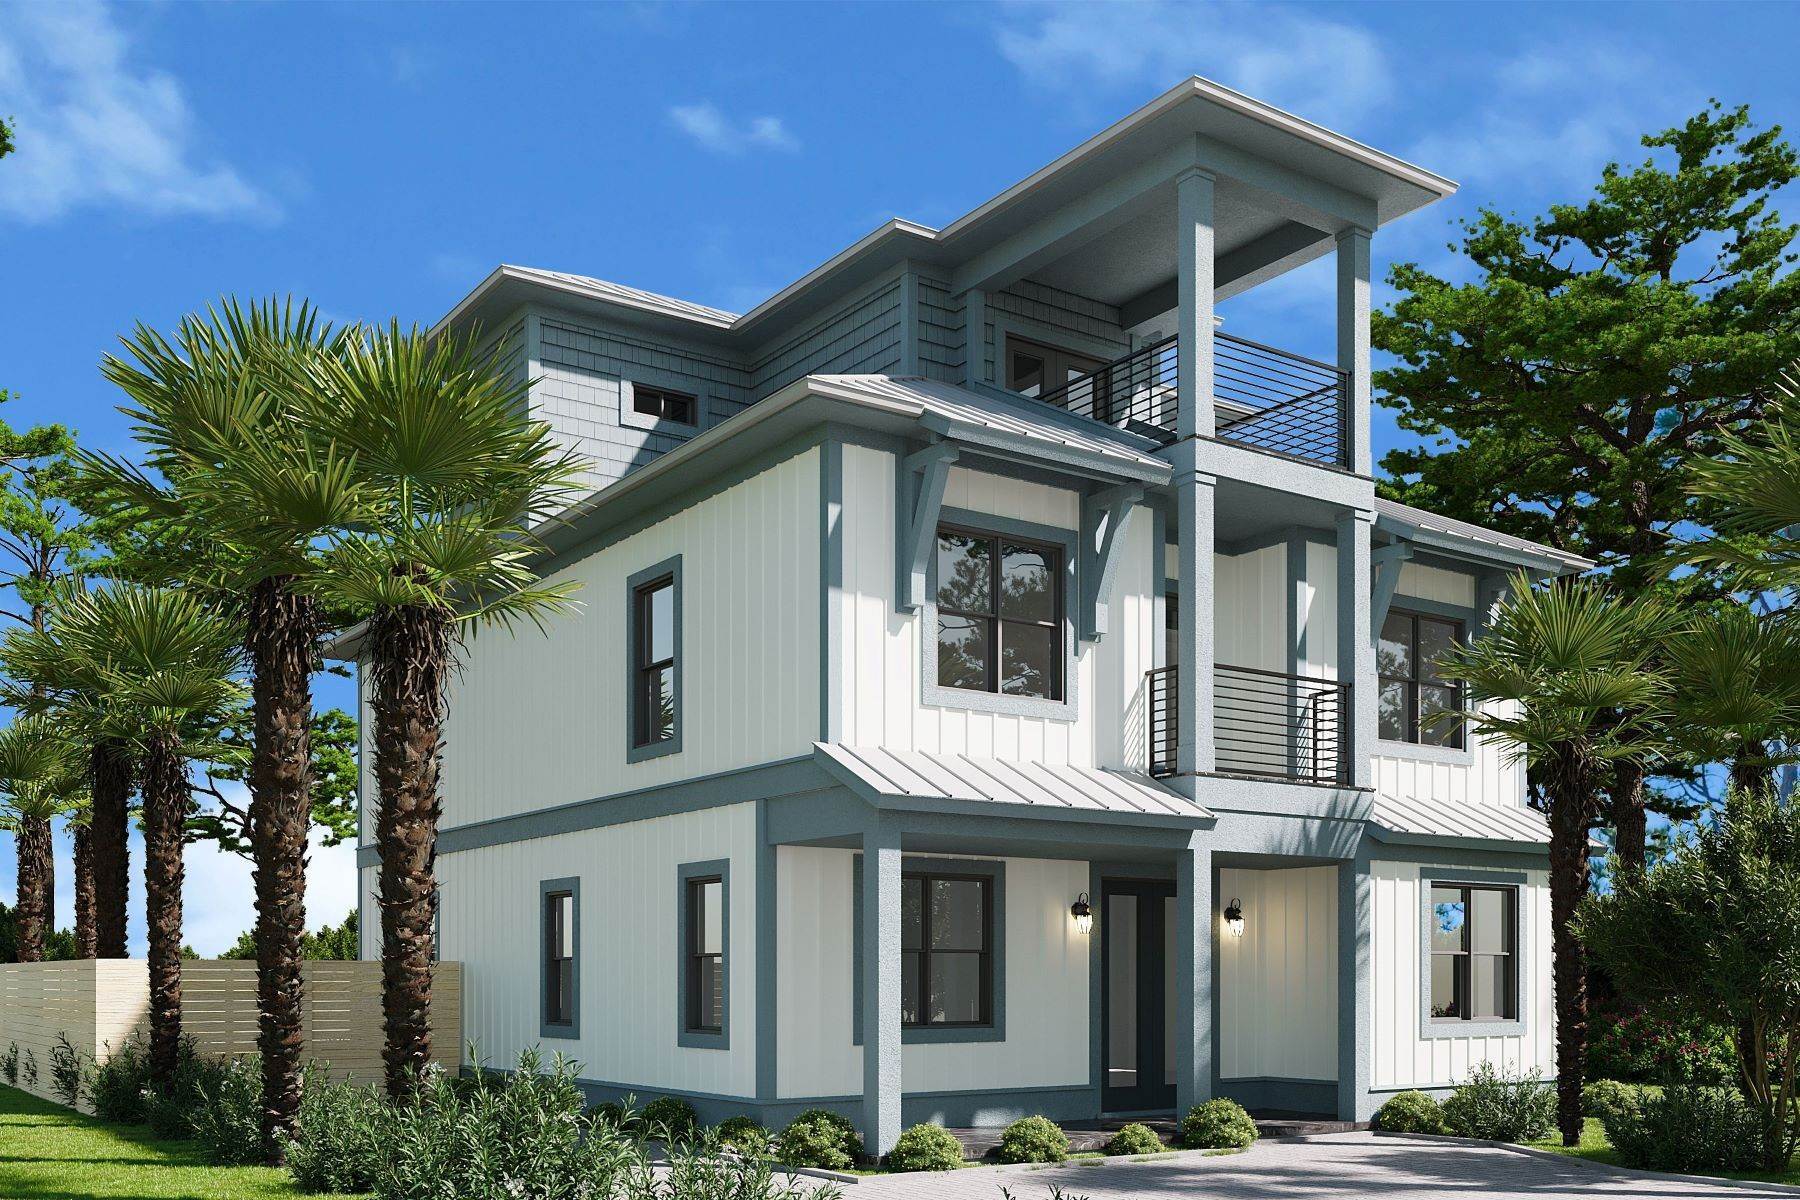 Single Family Homes for Sale at New Construction Home Poised To Be A Rental Powerhouse in Miramar Beach TBD Shelley's Way Miramar Beach, Florida 32550 United States